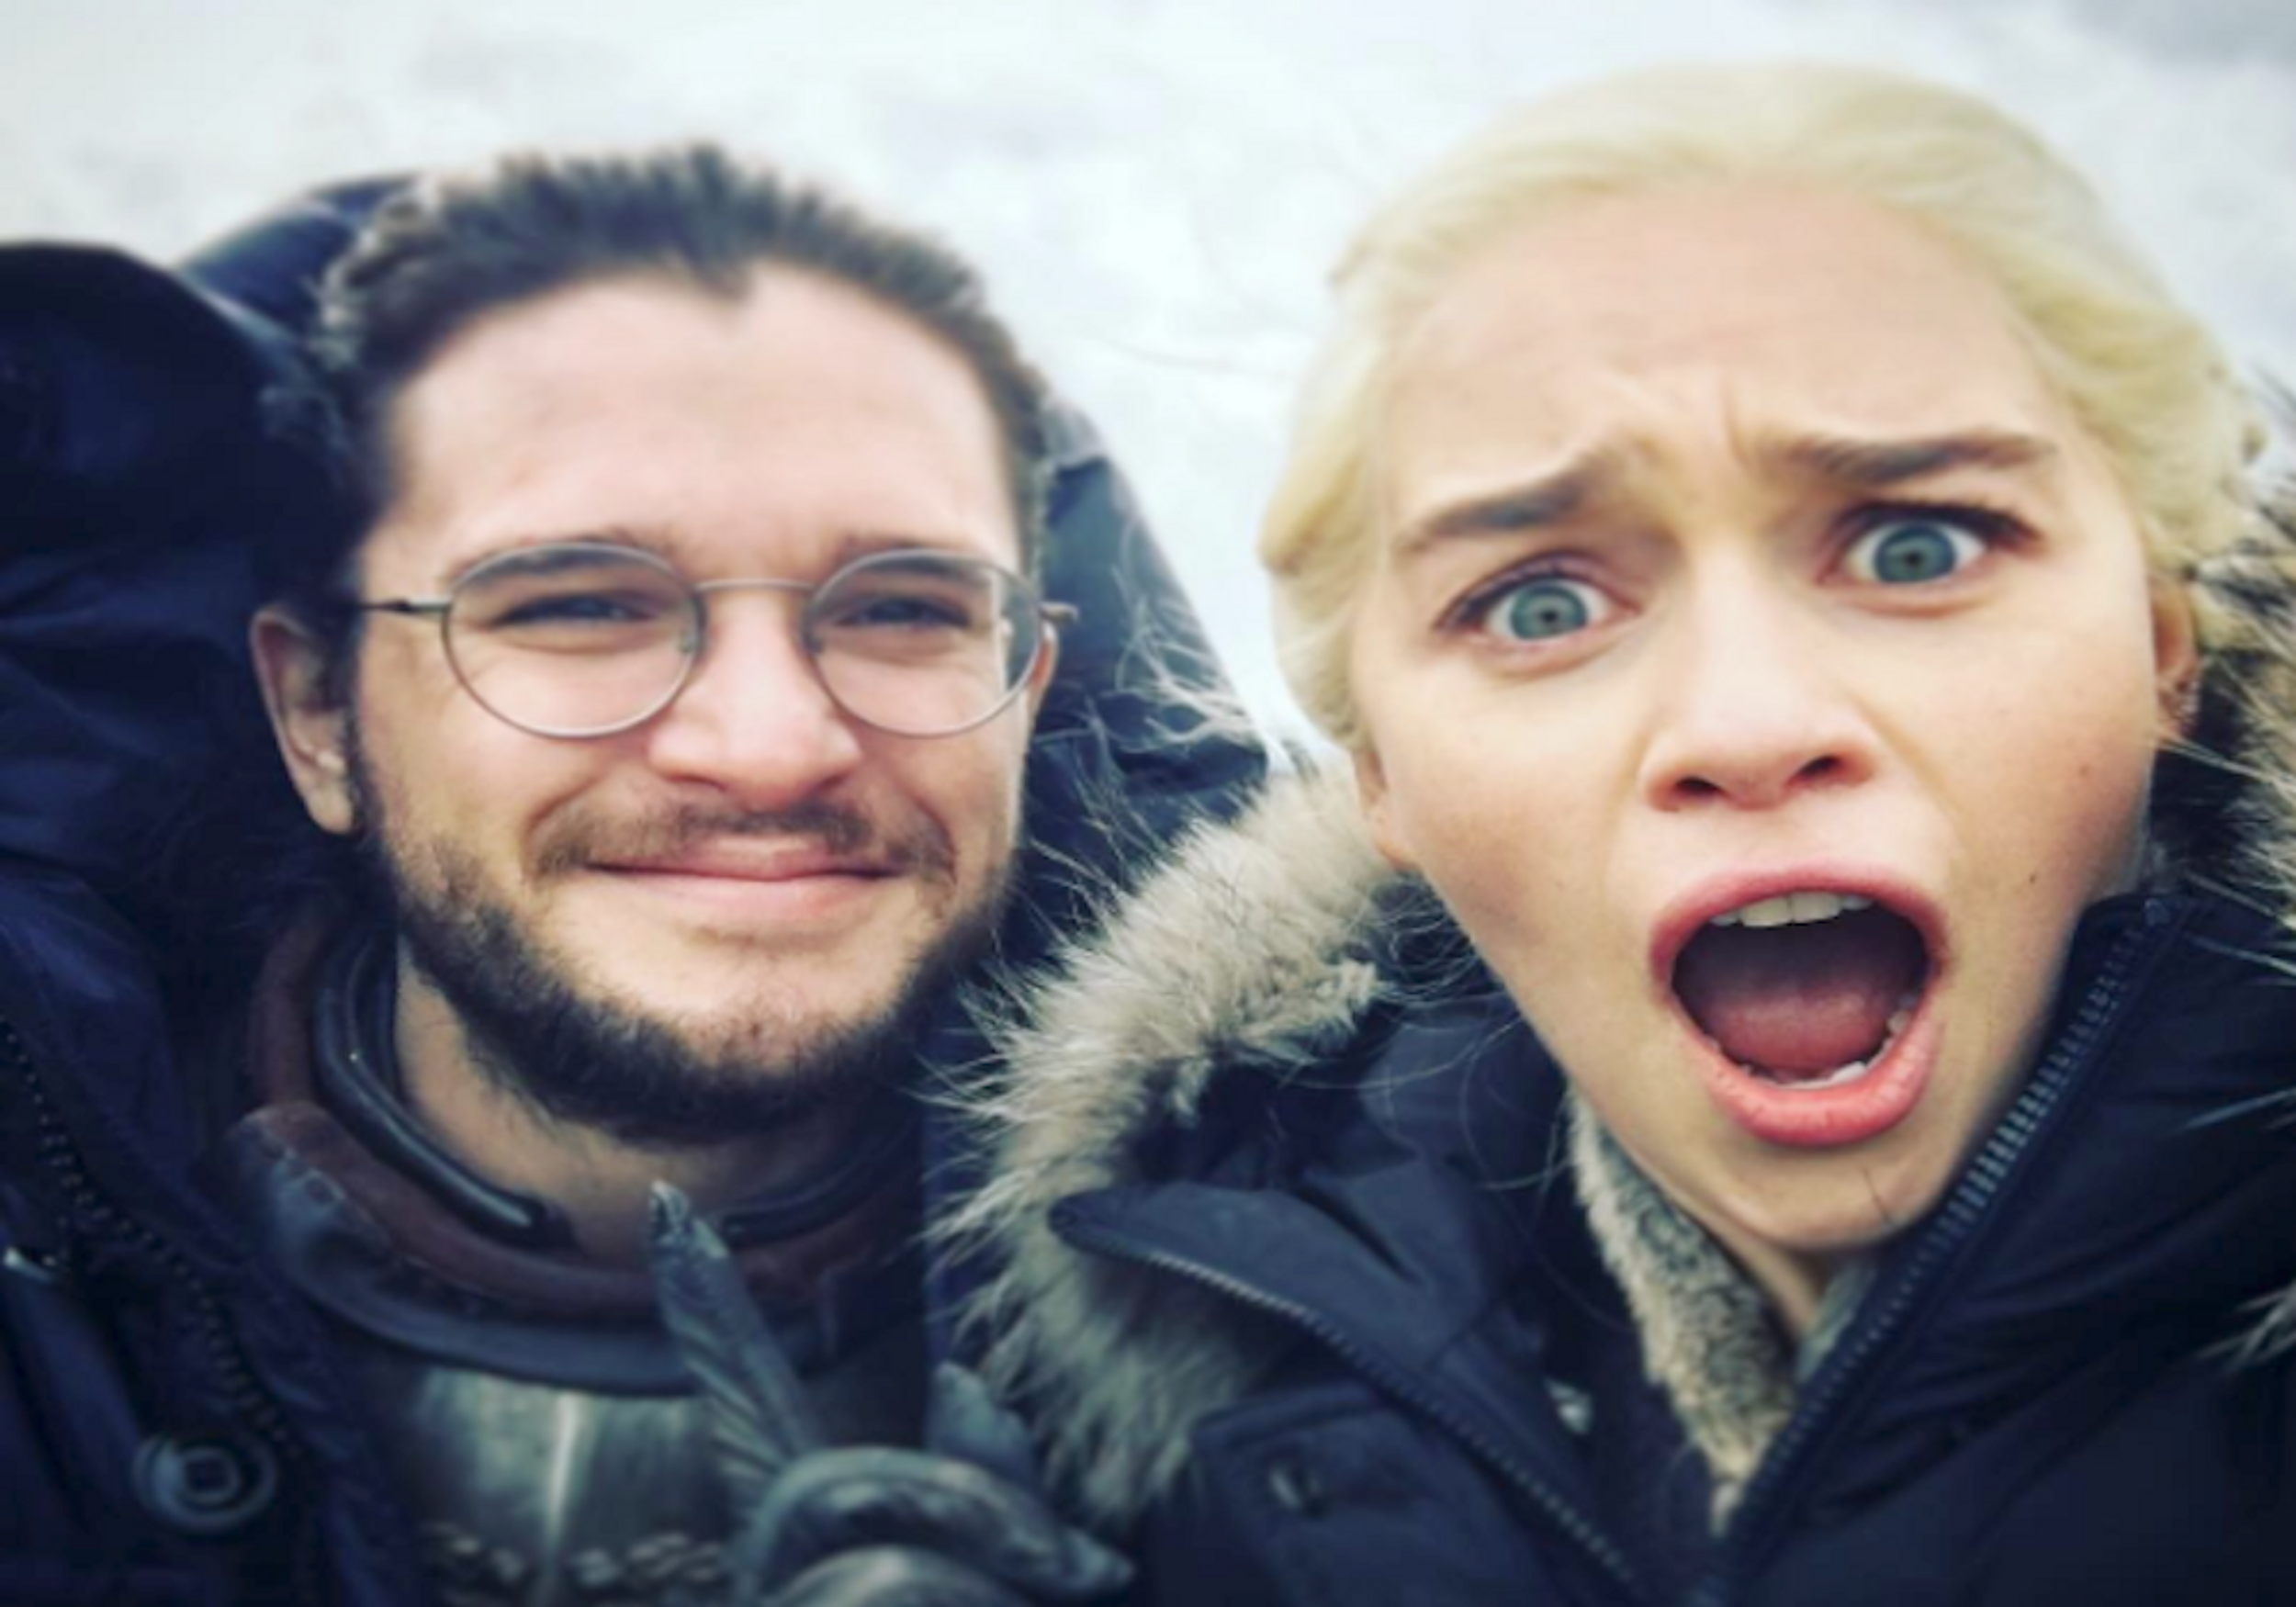 Man Who’s Never Seen ‘Game Of Thrones’ Reacts To Being Shown The Latest Episode